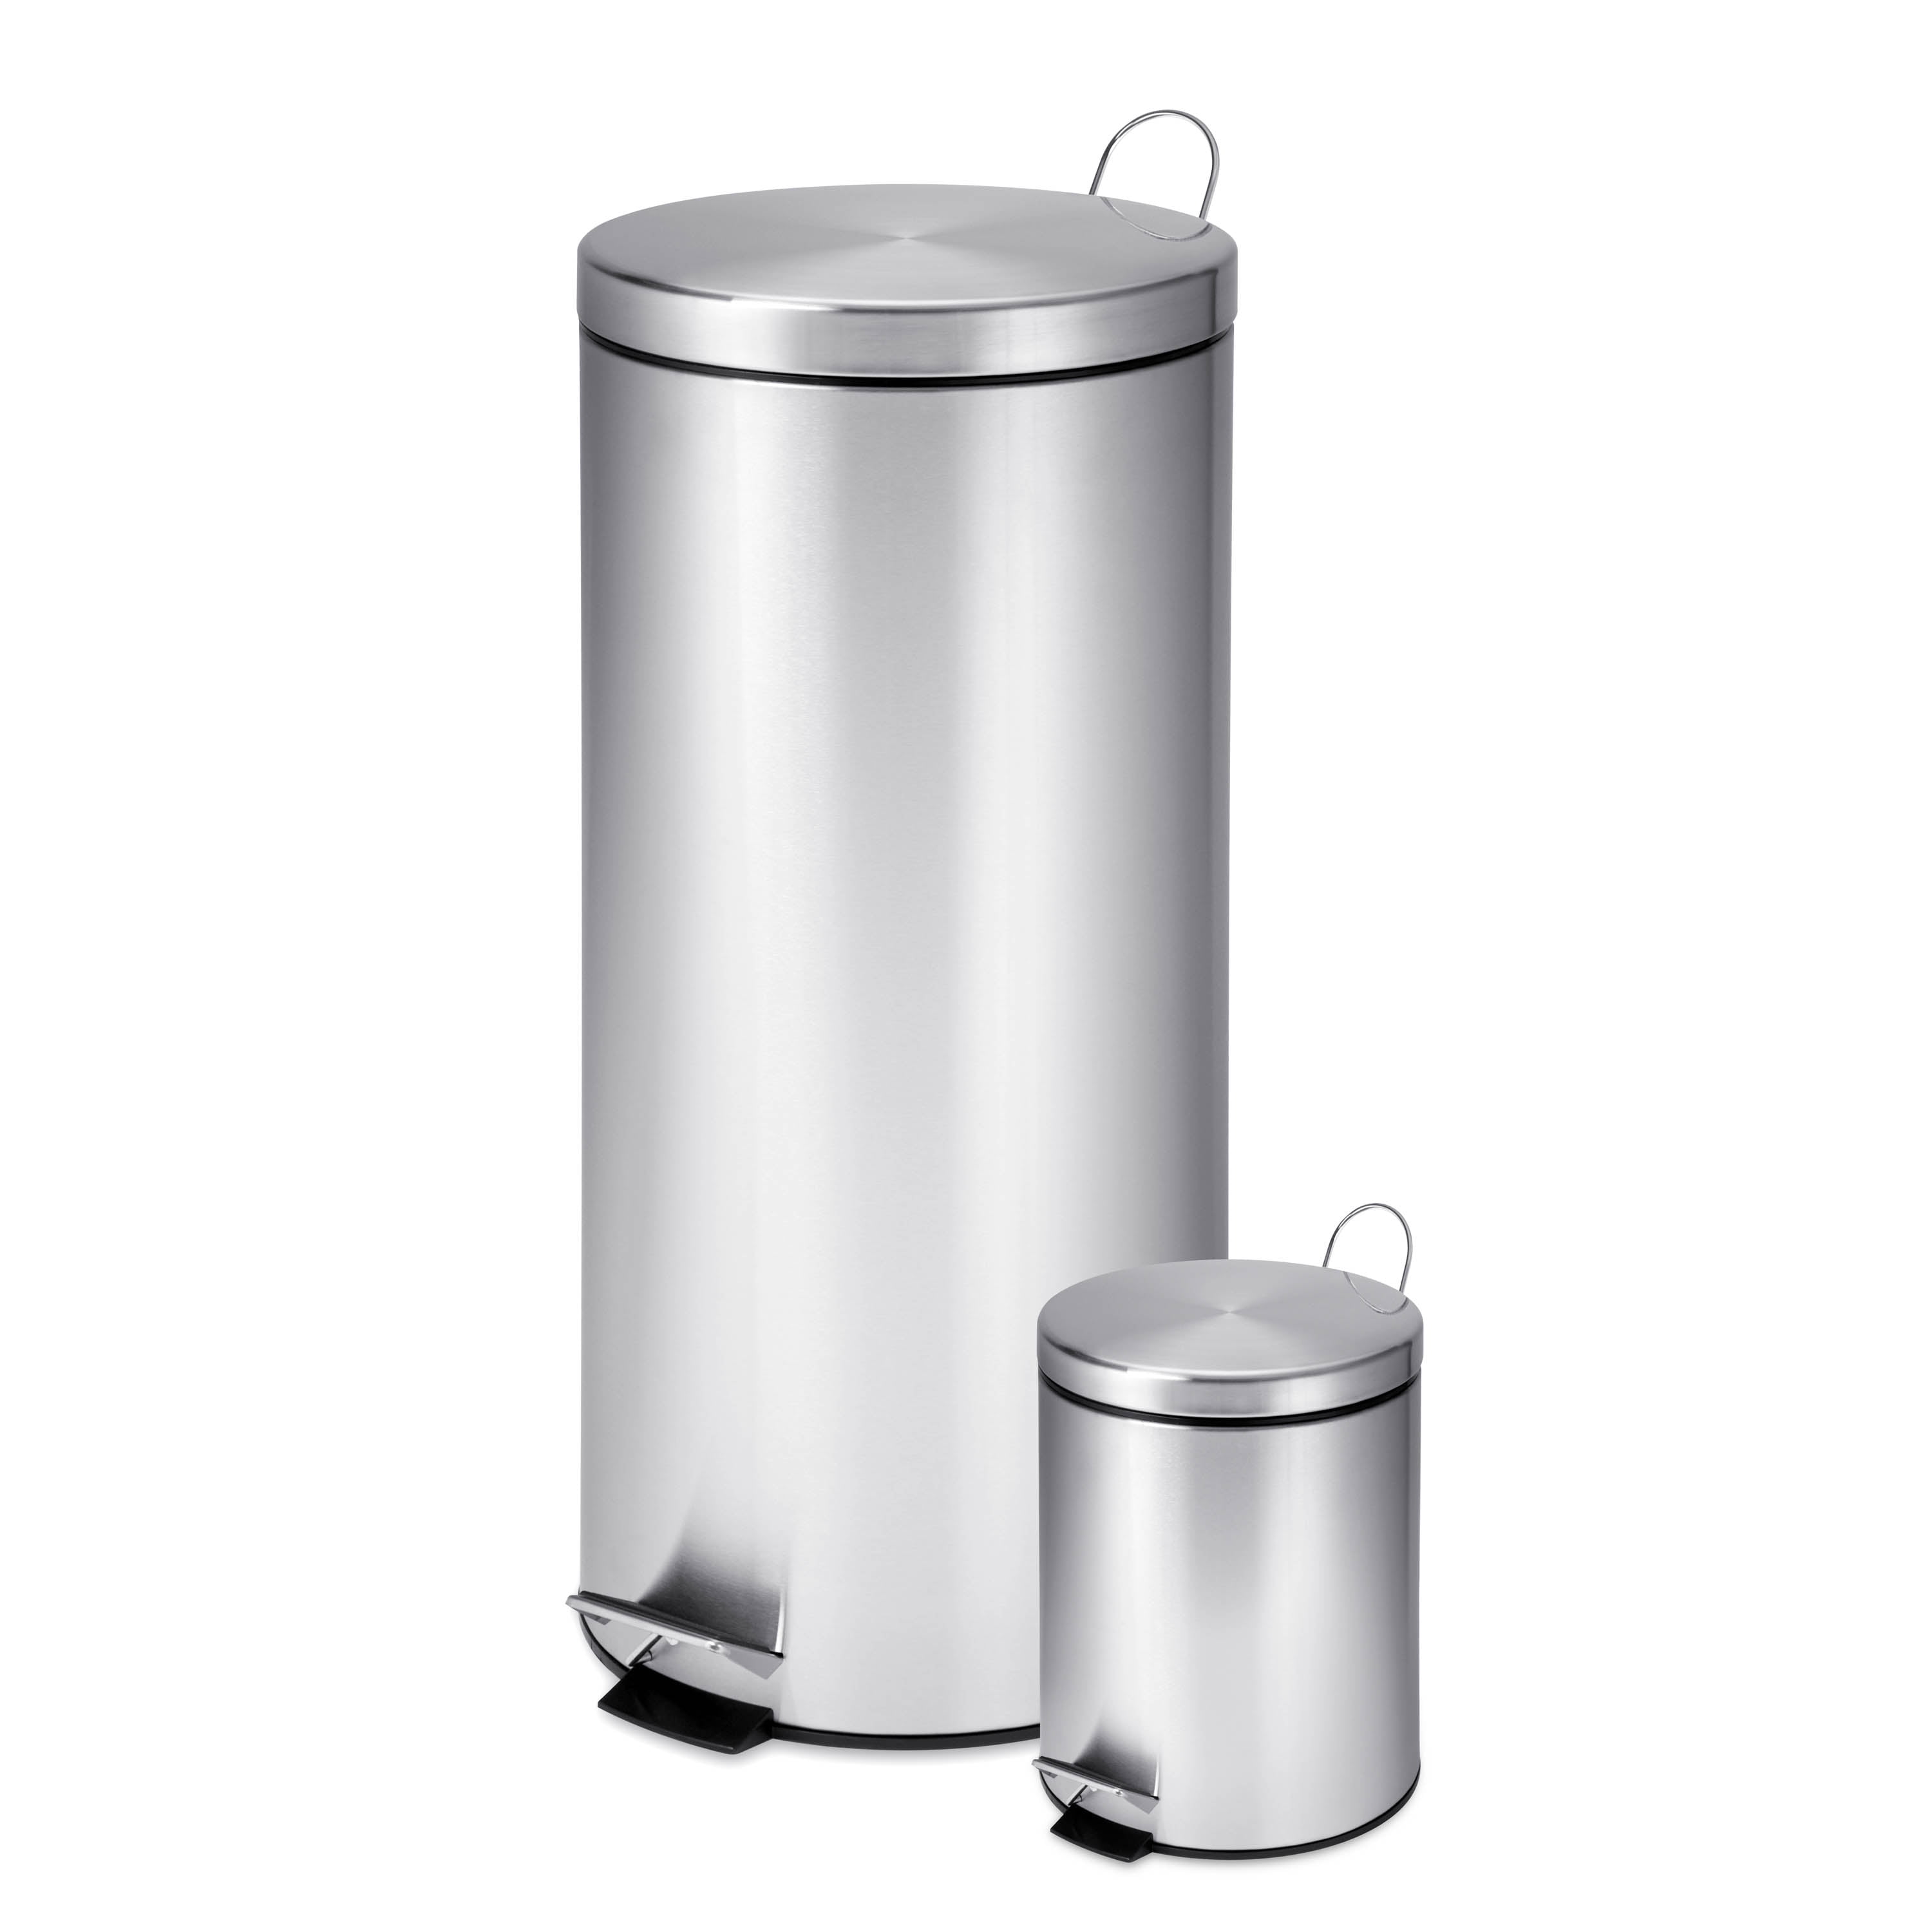 Mainstays MS-50-22 13.2 Gallon Stainless Steel Sensor Trash Can Silver for sale online 